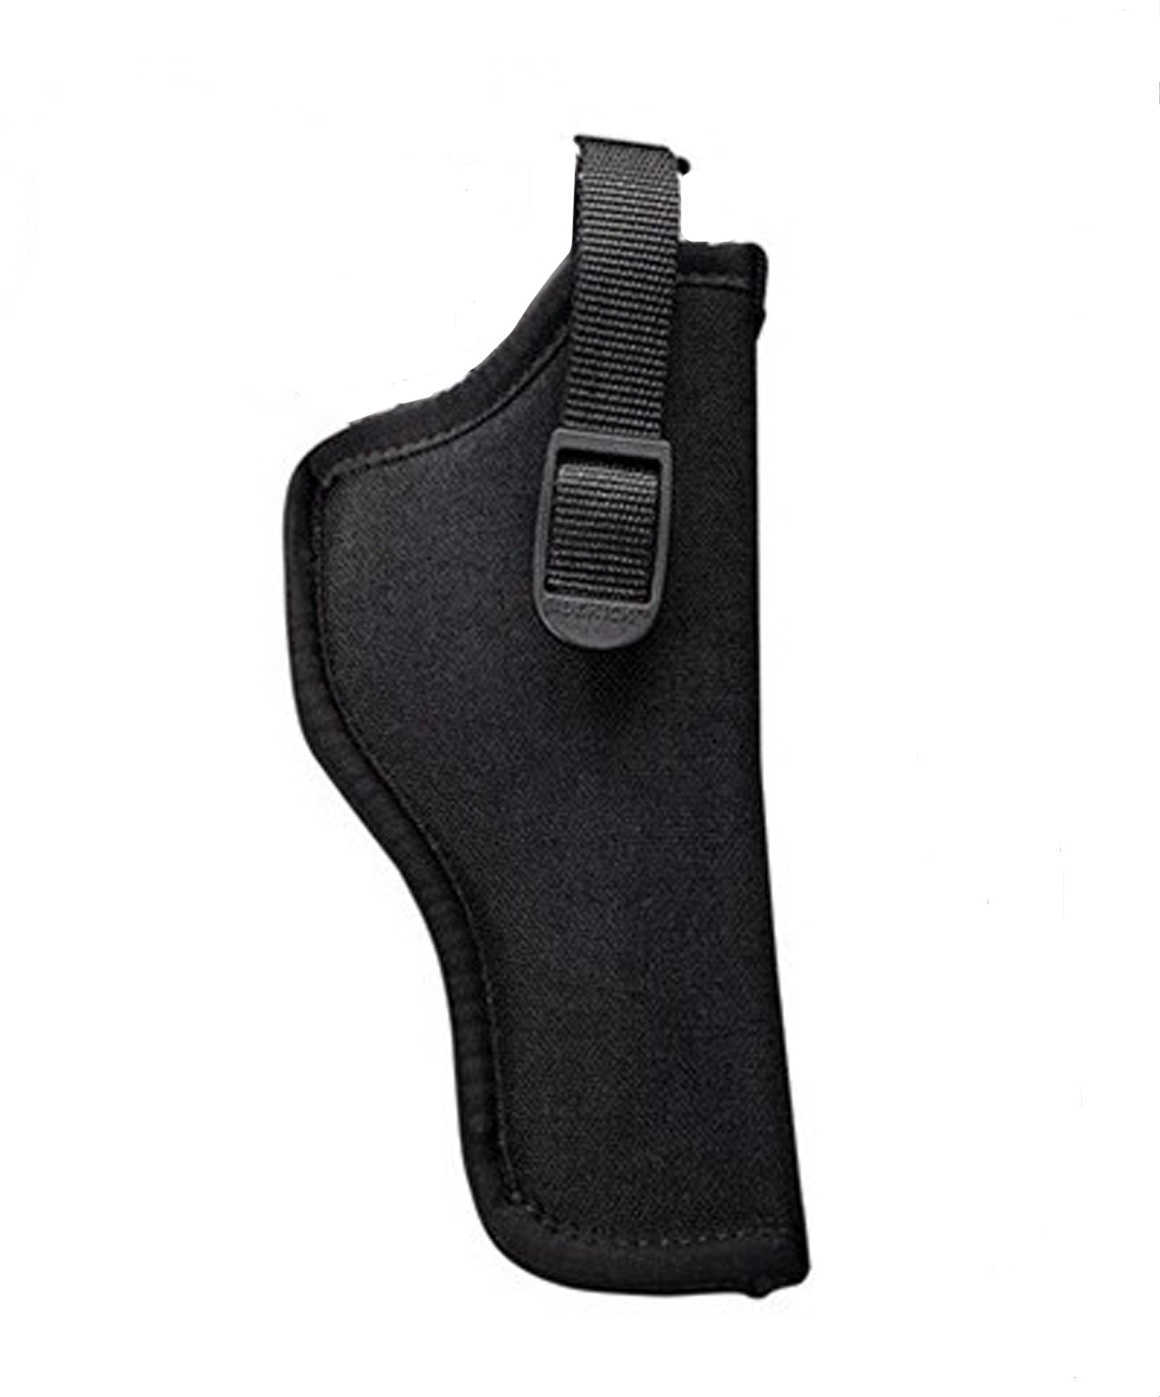 Uncle Mikes Sidekick Hip Holster - RH Black 3-4" Barrel Medium Autos Waterproof Molds To The Shape Of Your Gun